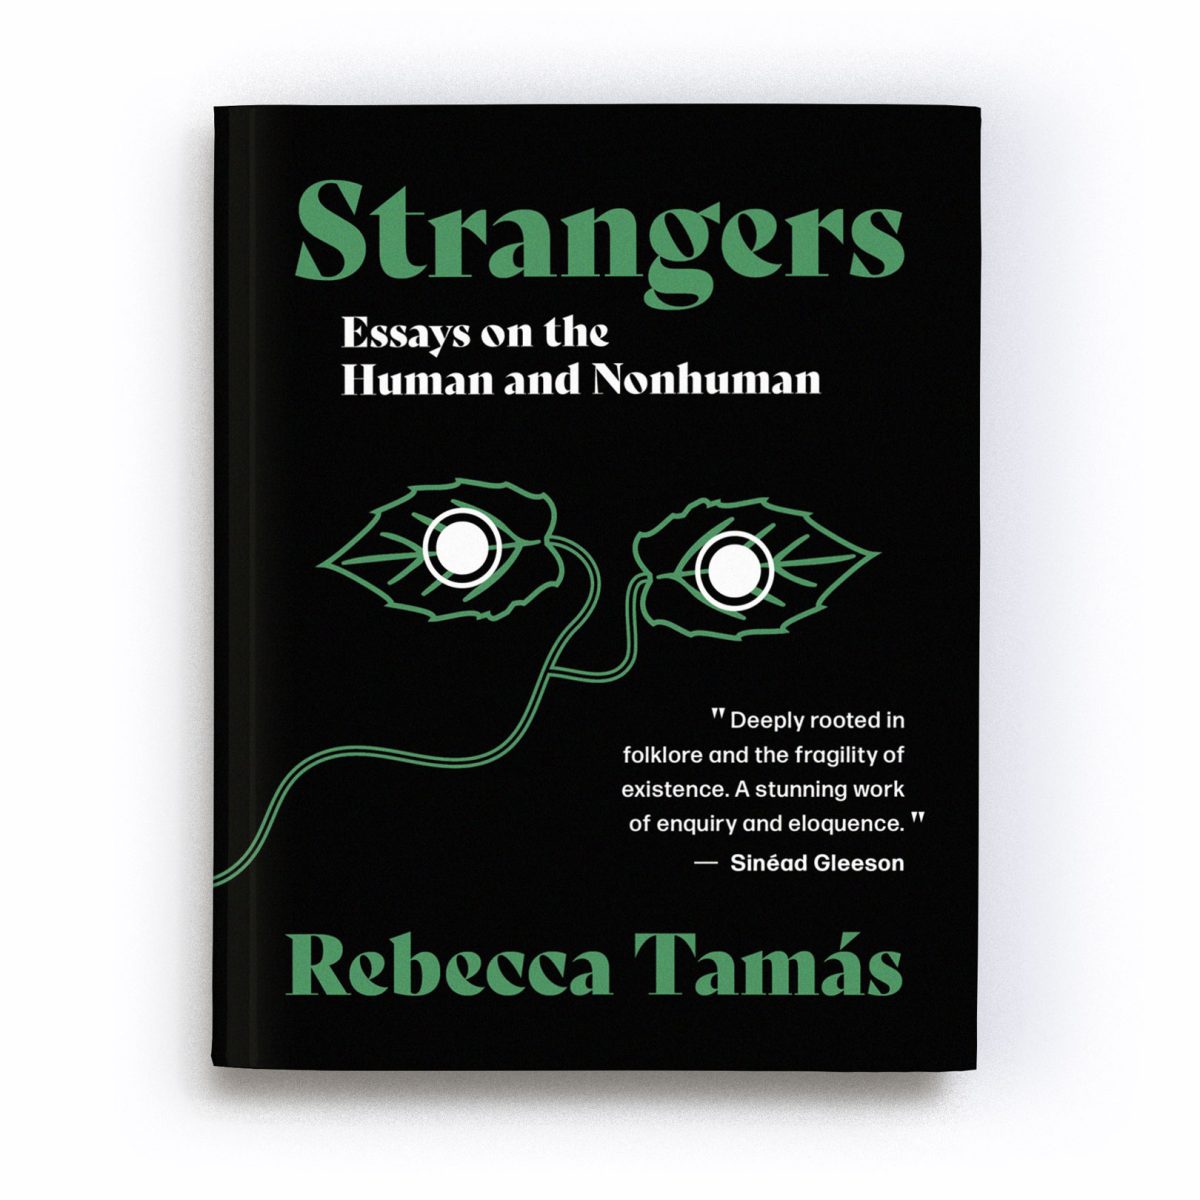 A render of the Charcoal Edition of the book ‘Strangers: Essays on the Human and Nonhuman’. In the centre of the cover is an abstract motif of two green leaves, joined by a stalk which winds from the centre to the bottom left of the cover. A white filled circle, outlined with a ring, overlays each leaf, giving the impression the leaves are a pair of eyes staring out at us from the cover. A quote by Sinéad Gleeson reads: 'Tamás’ essays are deeply rooted in folklore and the fragility of existence. A stunning work of enquiry and eloquence.' The text is a mixture of white and green in colour and is placed on a black background.